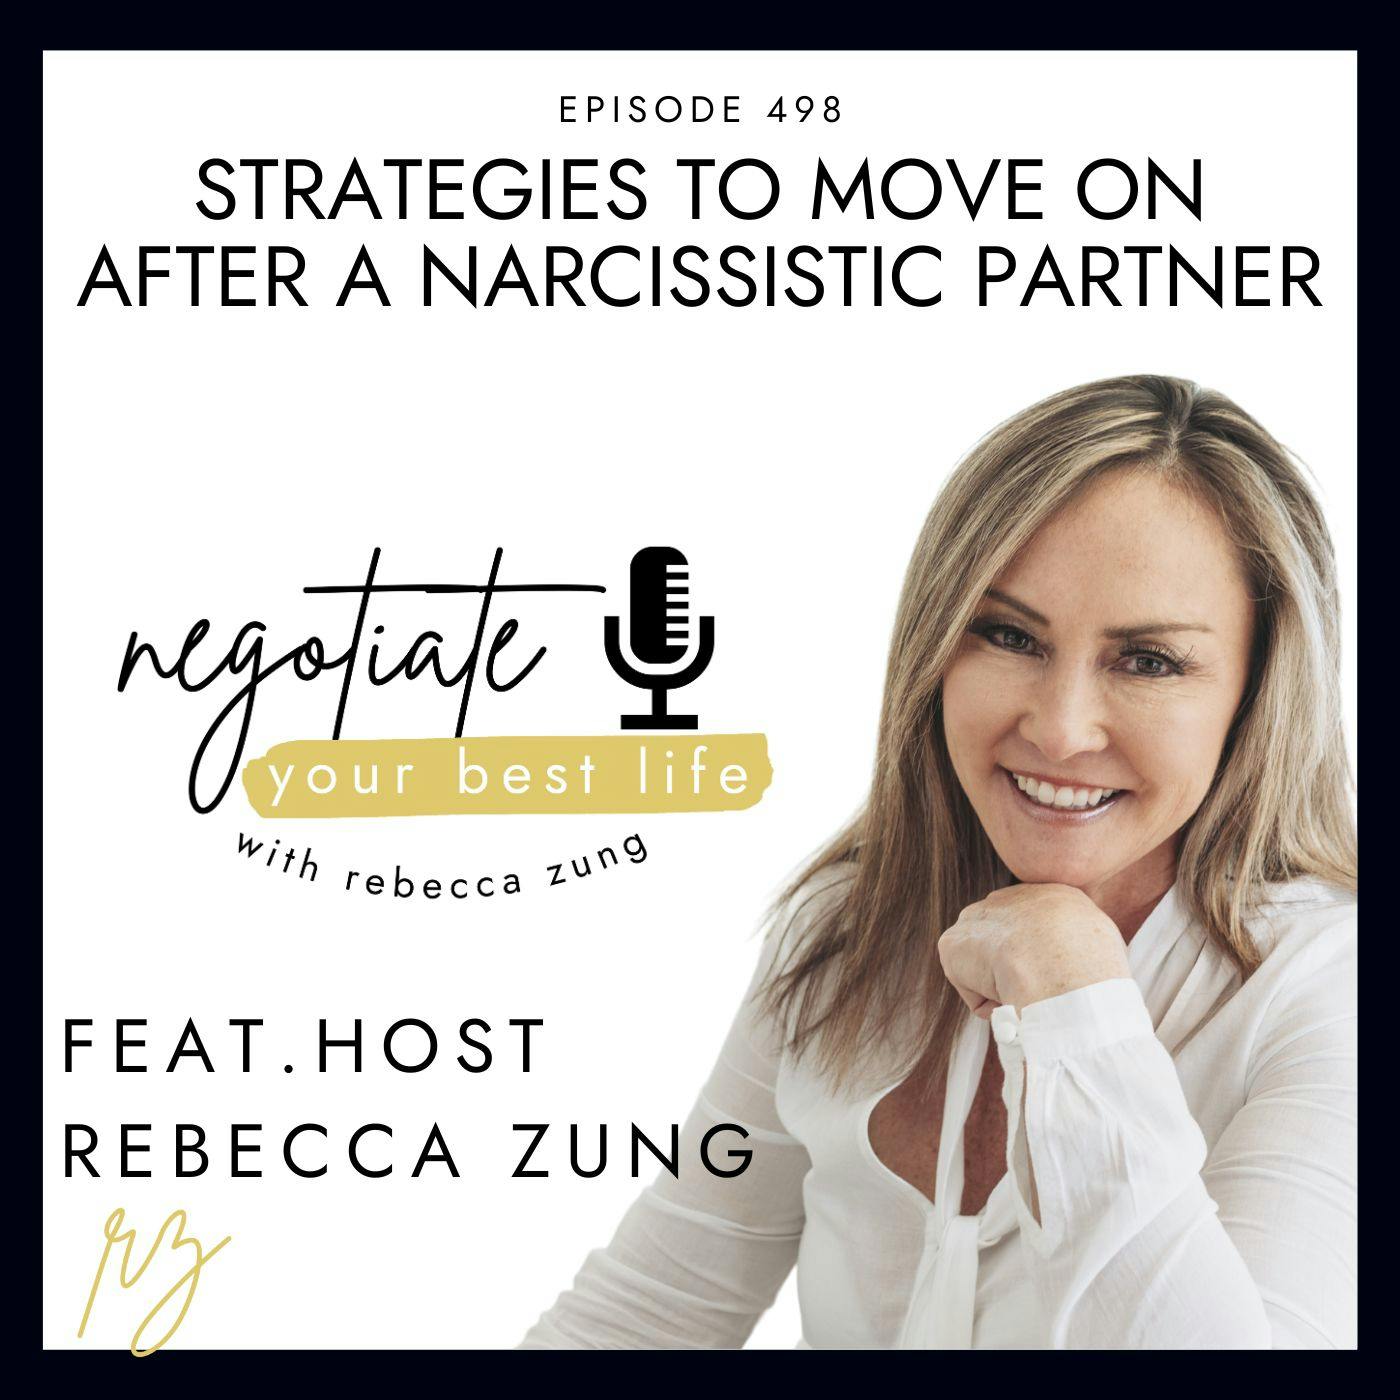 Strategies to Move on After a Narcissistic Partner with Rebecca Zung on Negotiate Your Best Life #498